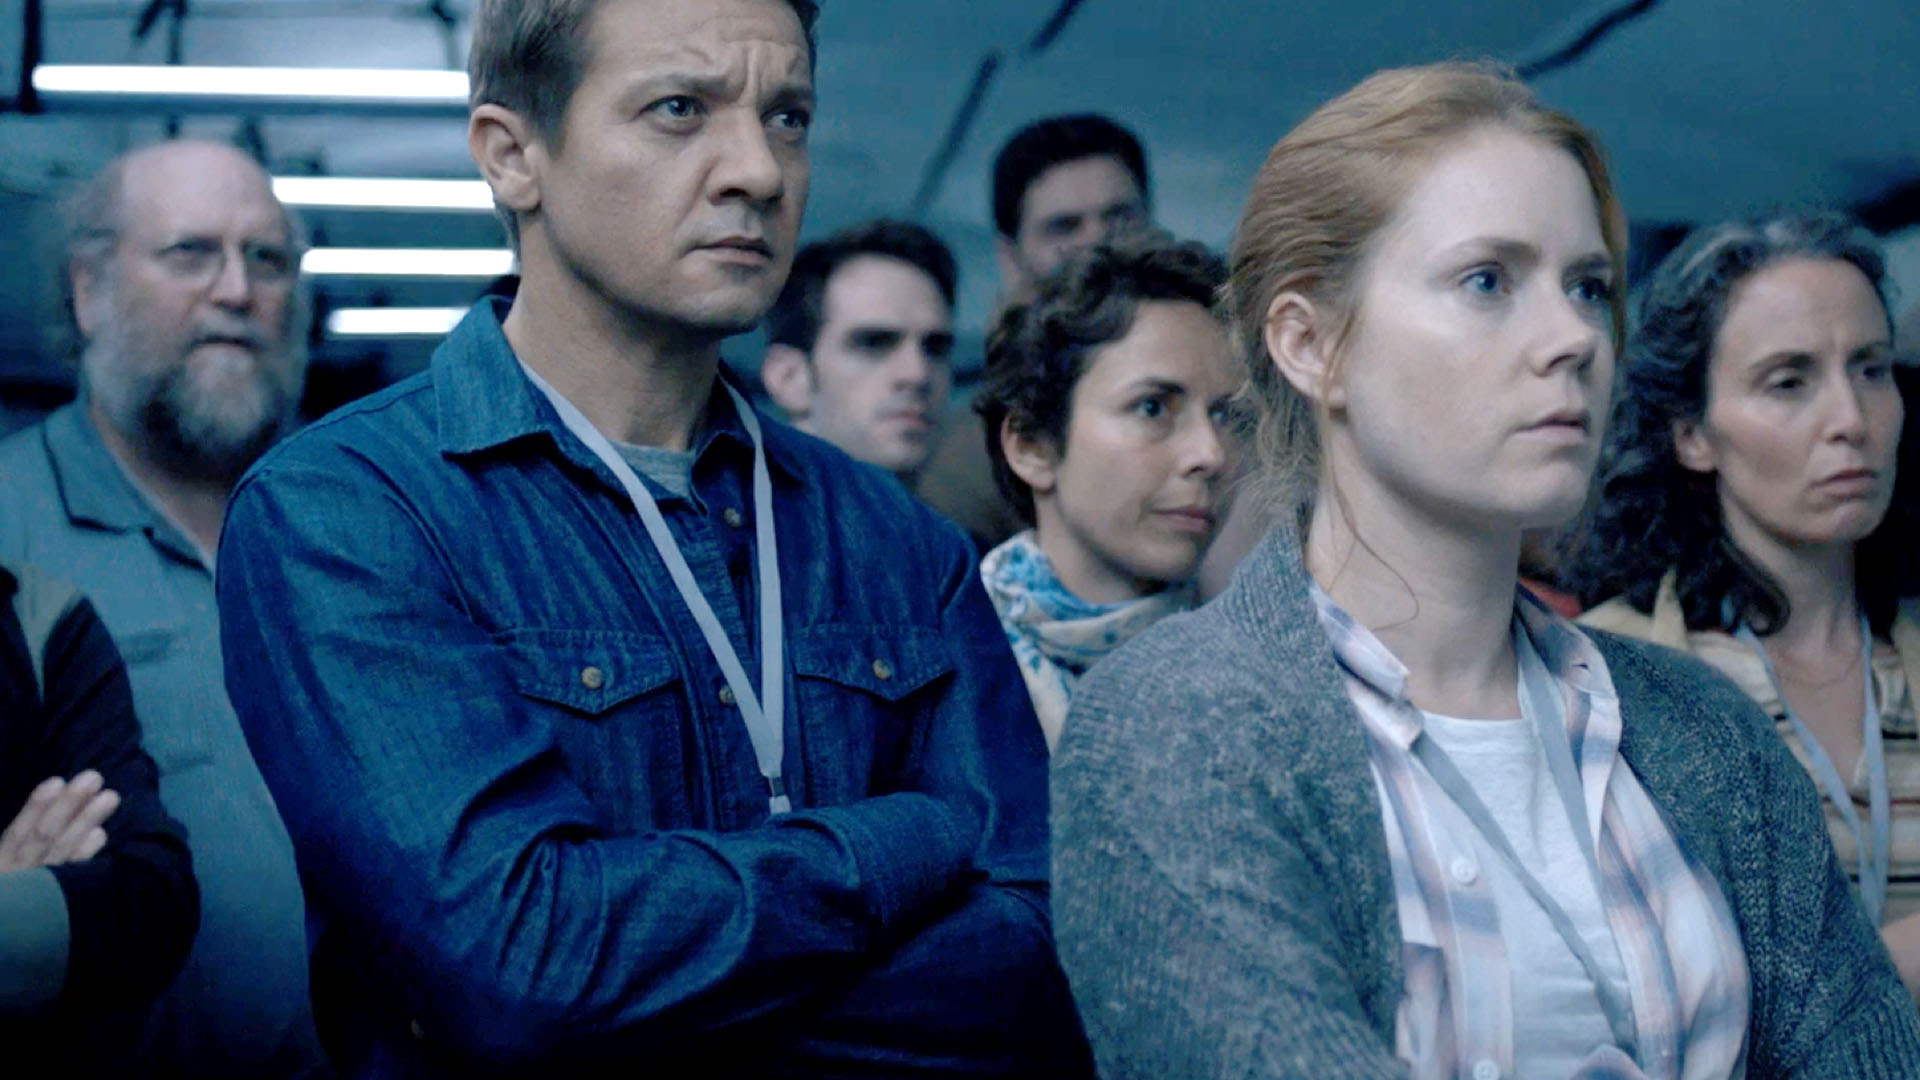 ‘Arrival’ is more than an alien invasion film